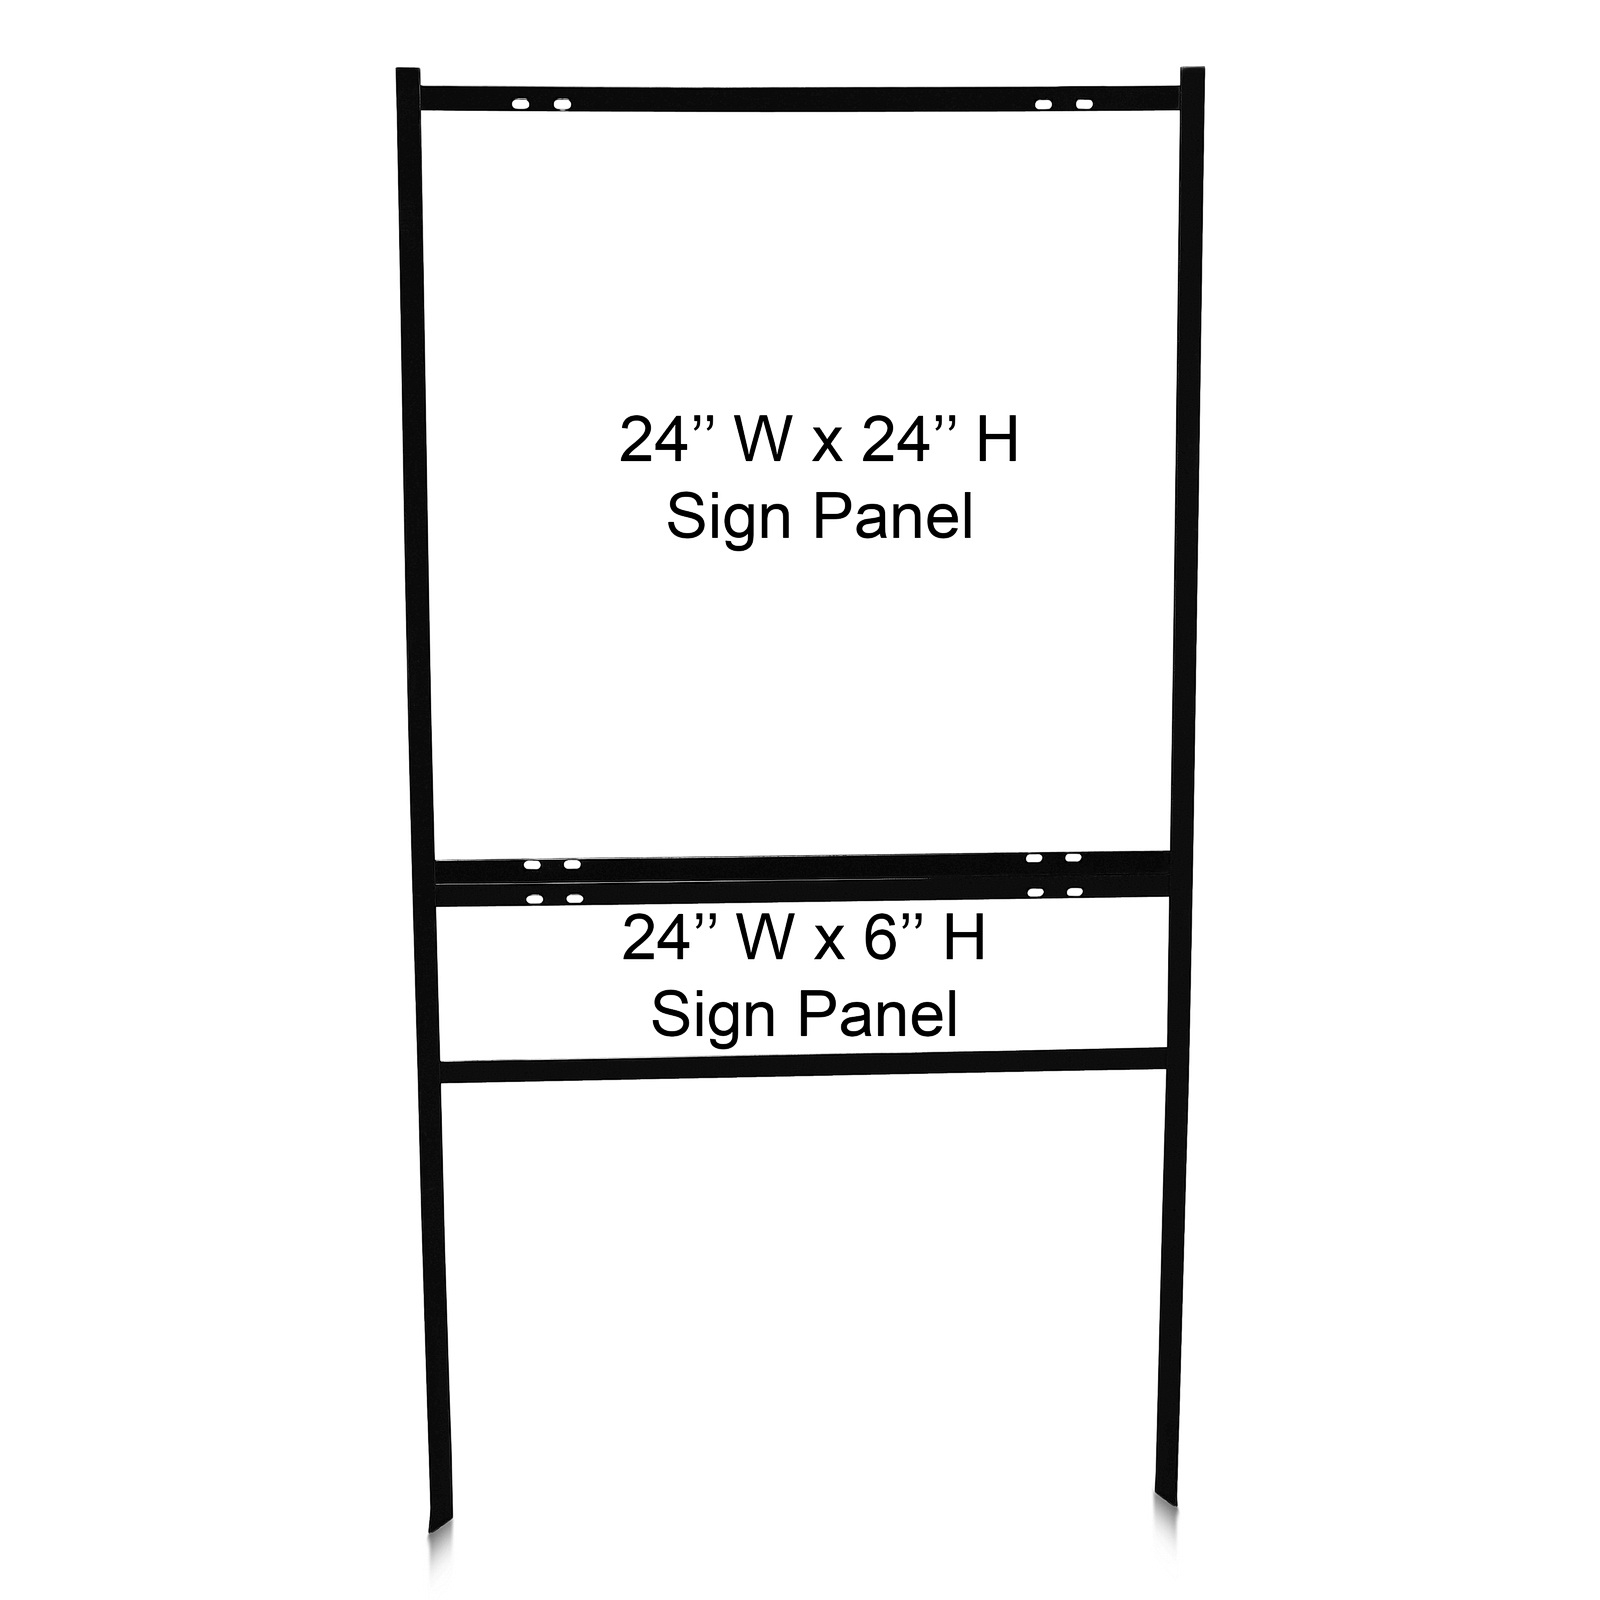 24'' Wide x 24'' Tall Black Single Rider Slide-in/Bolt-in Real Estate Sign Panel Frame (accepts up to 1/8'' thickness)